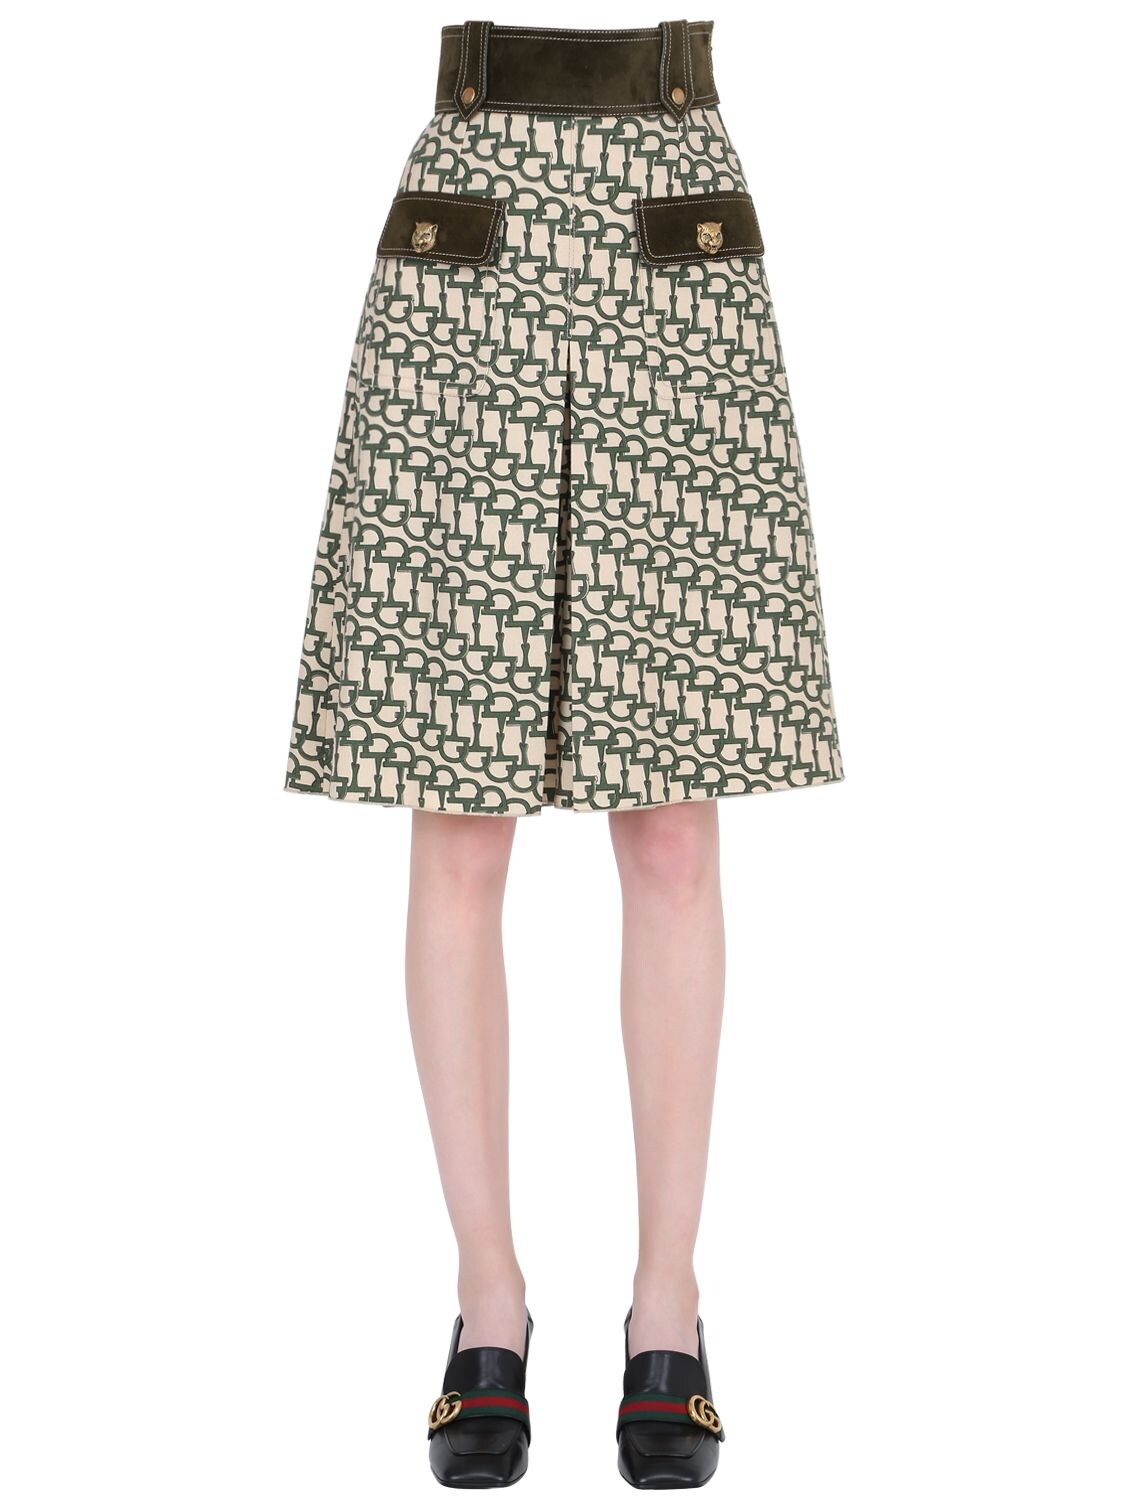 PRINTED WOOL SHORTS W/ SUEDE DETAILS